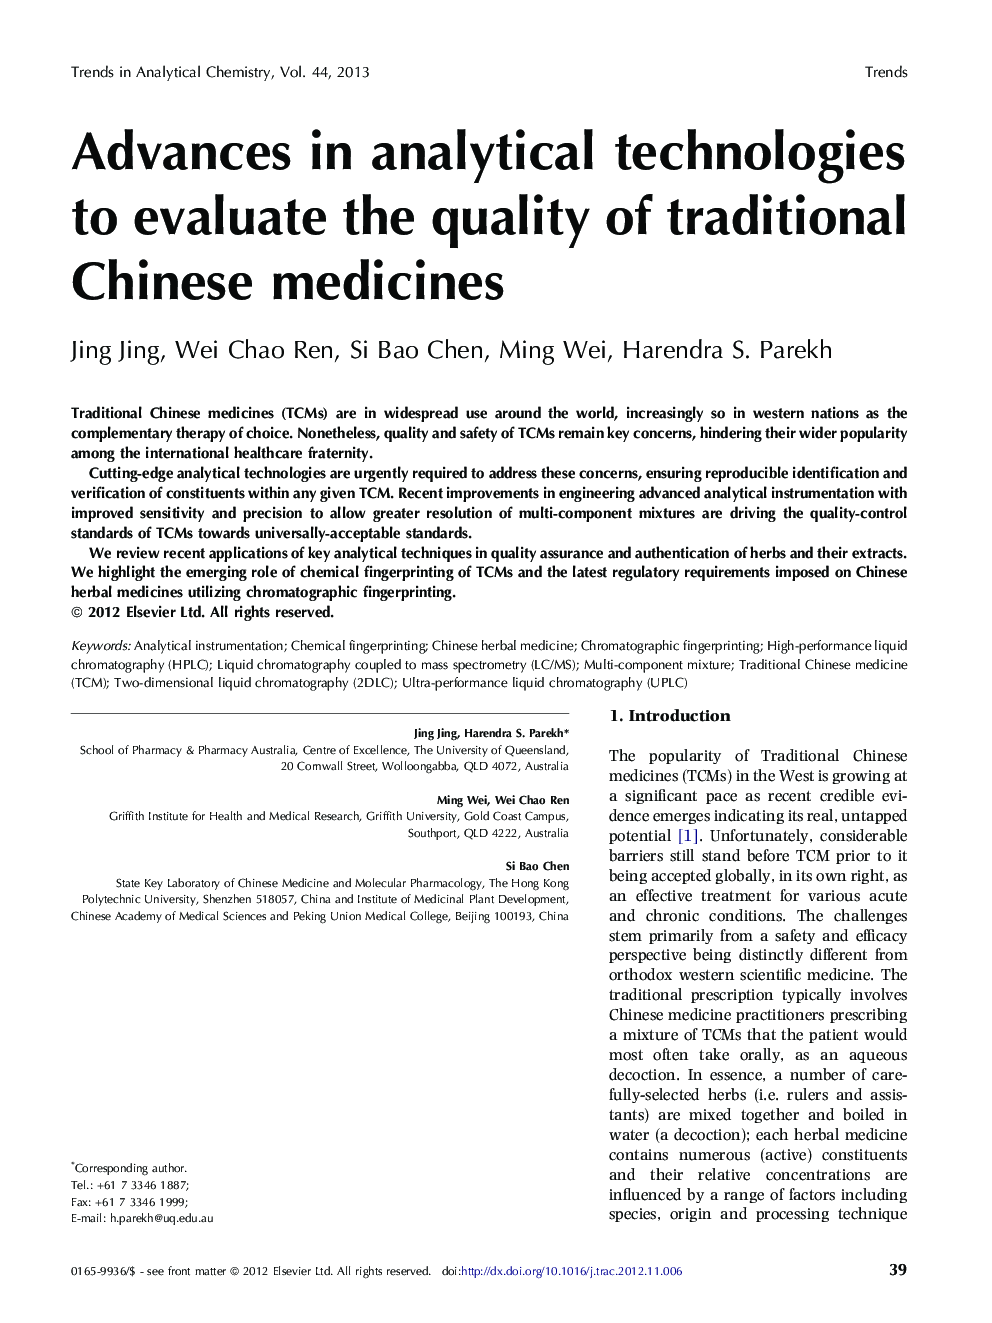 Advances in analytical technologies to evaluate the quality of traditional Chinese medicines